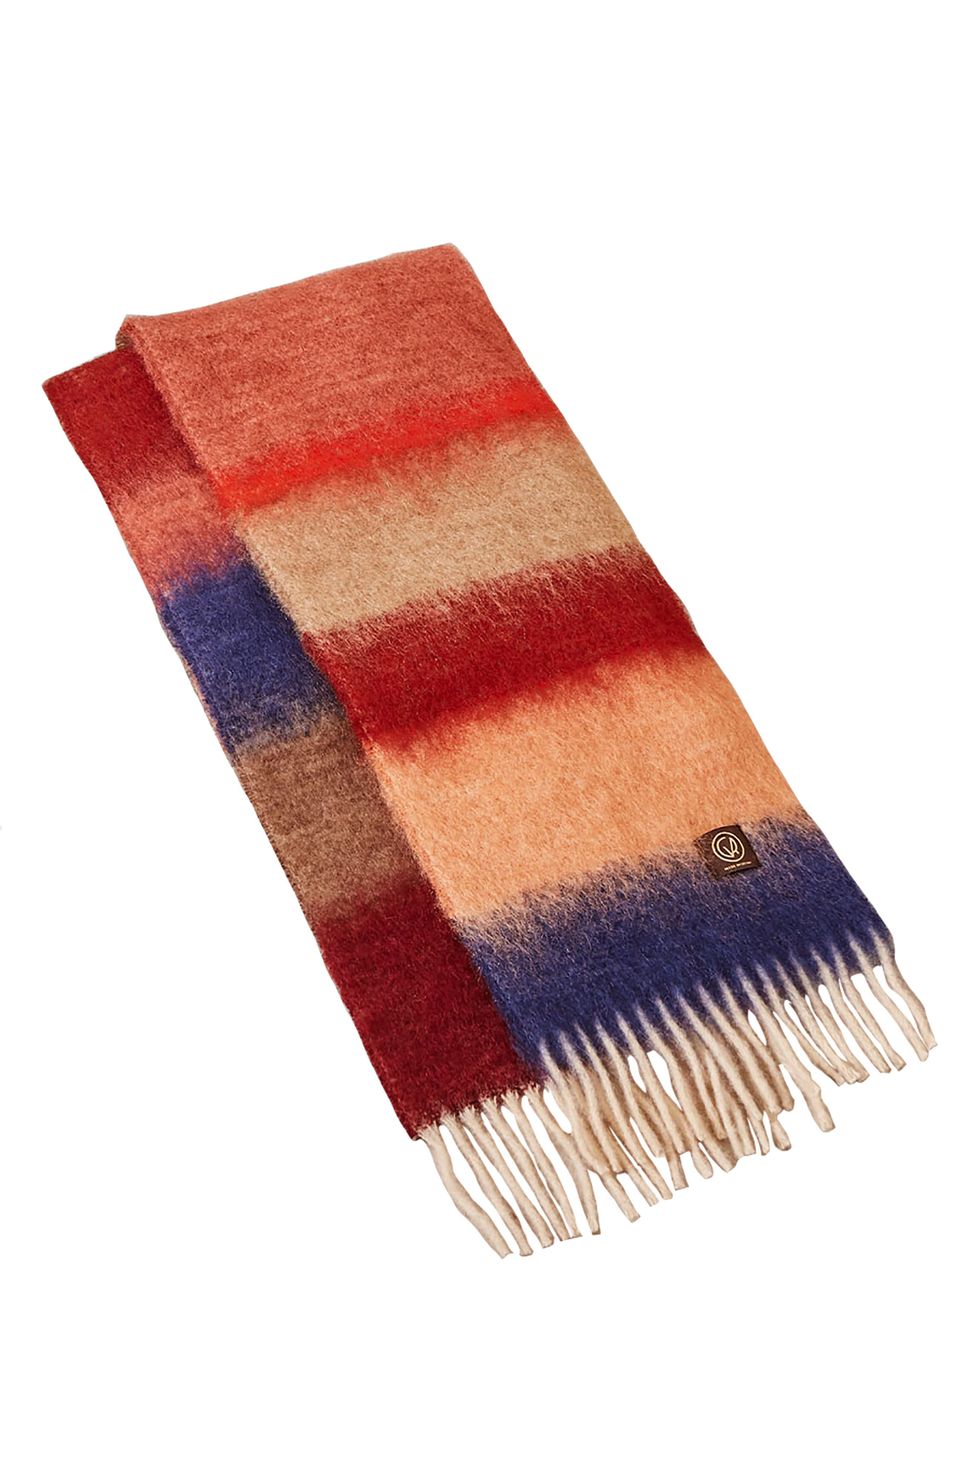 Goodee x Ezcaray Matisse Mohair and Wool Scarf